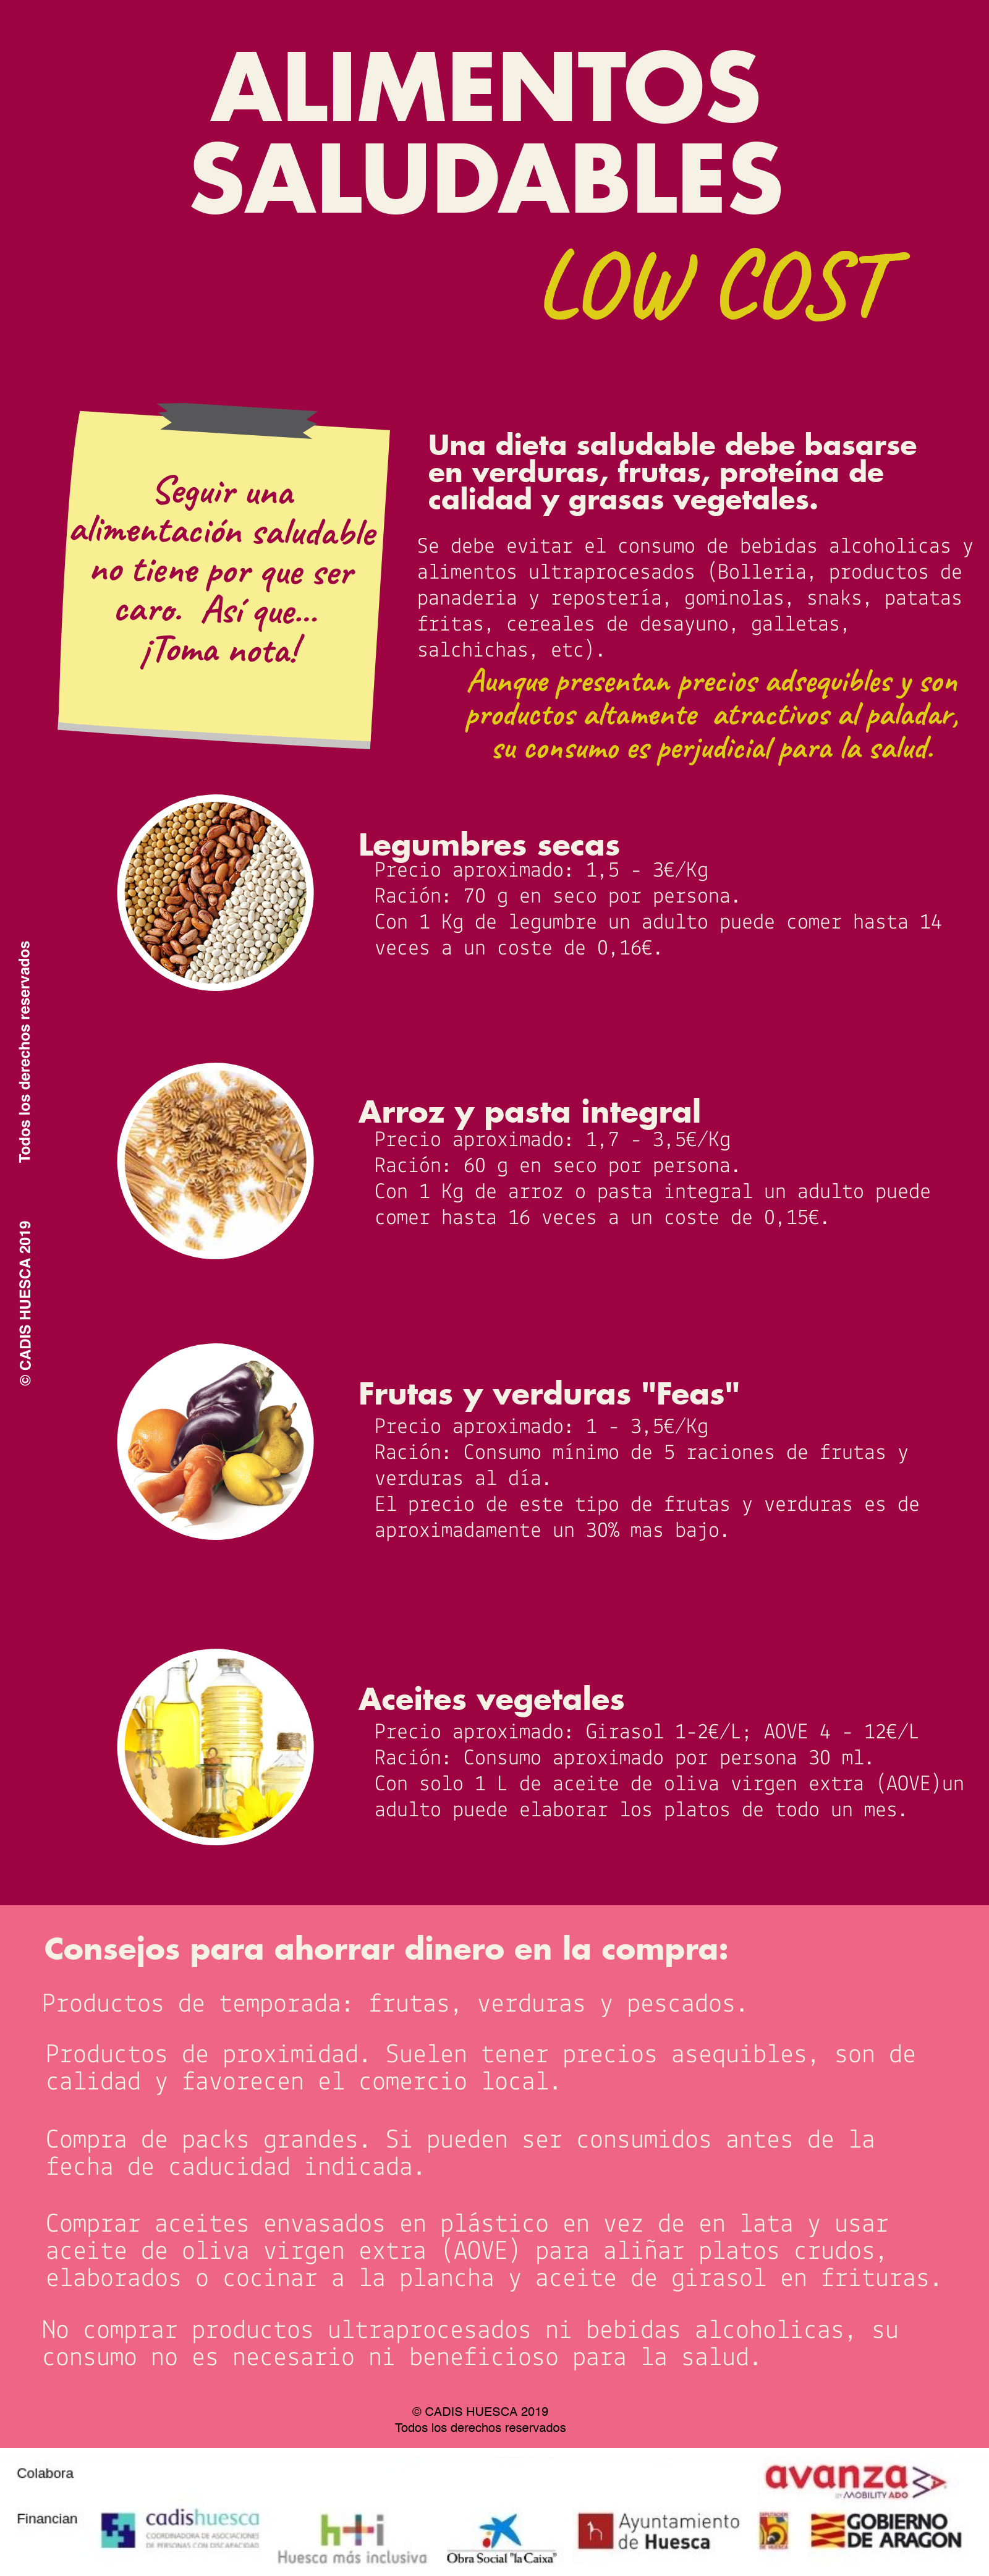 6. Alimentos saludables Low cost